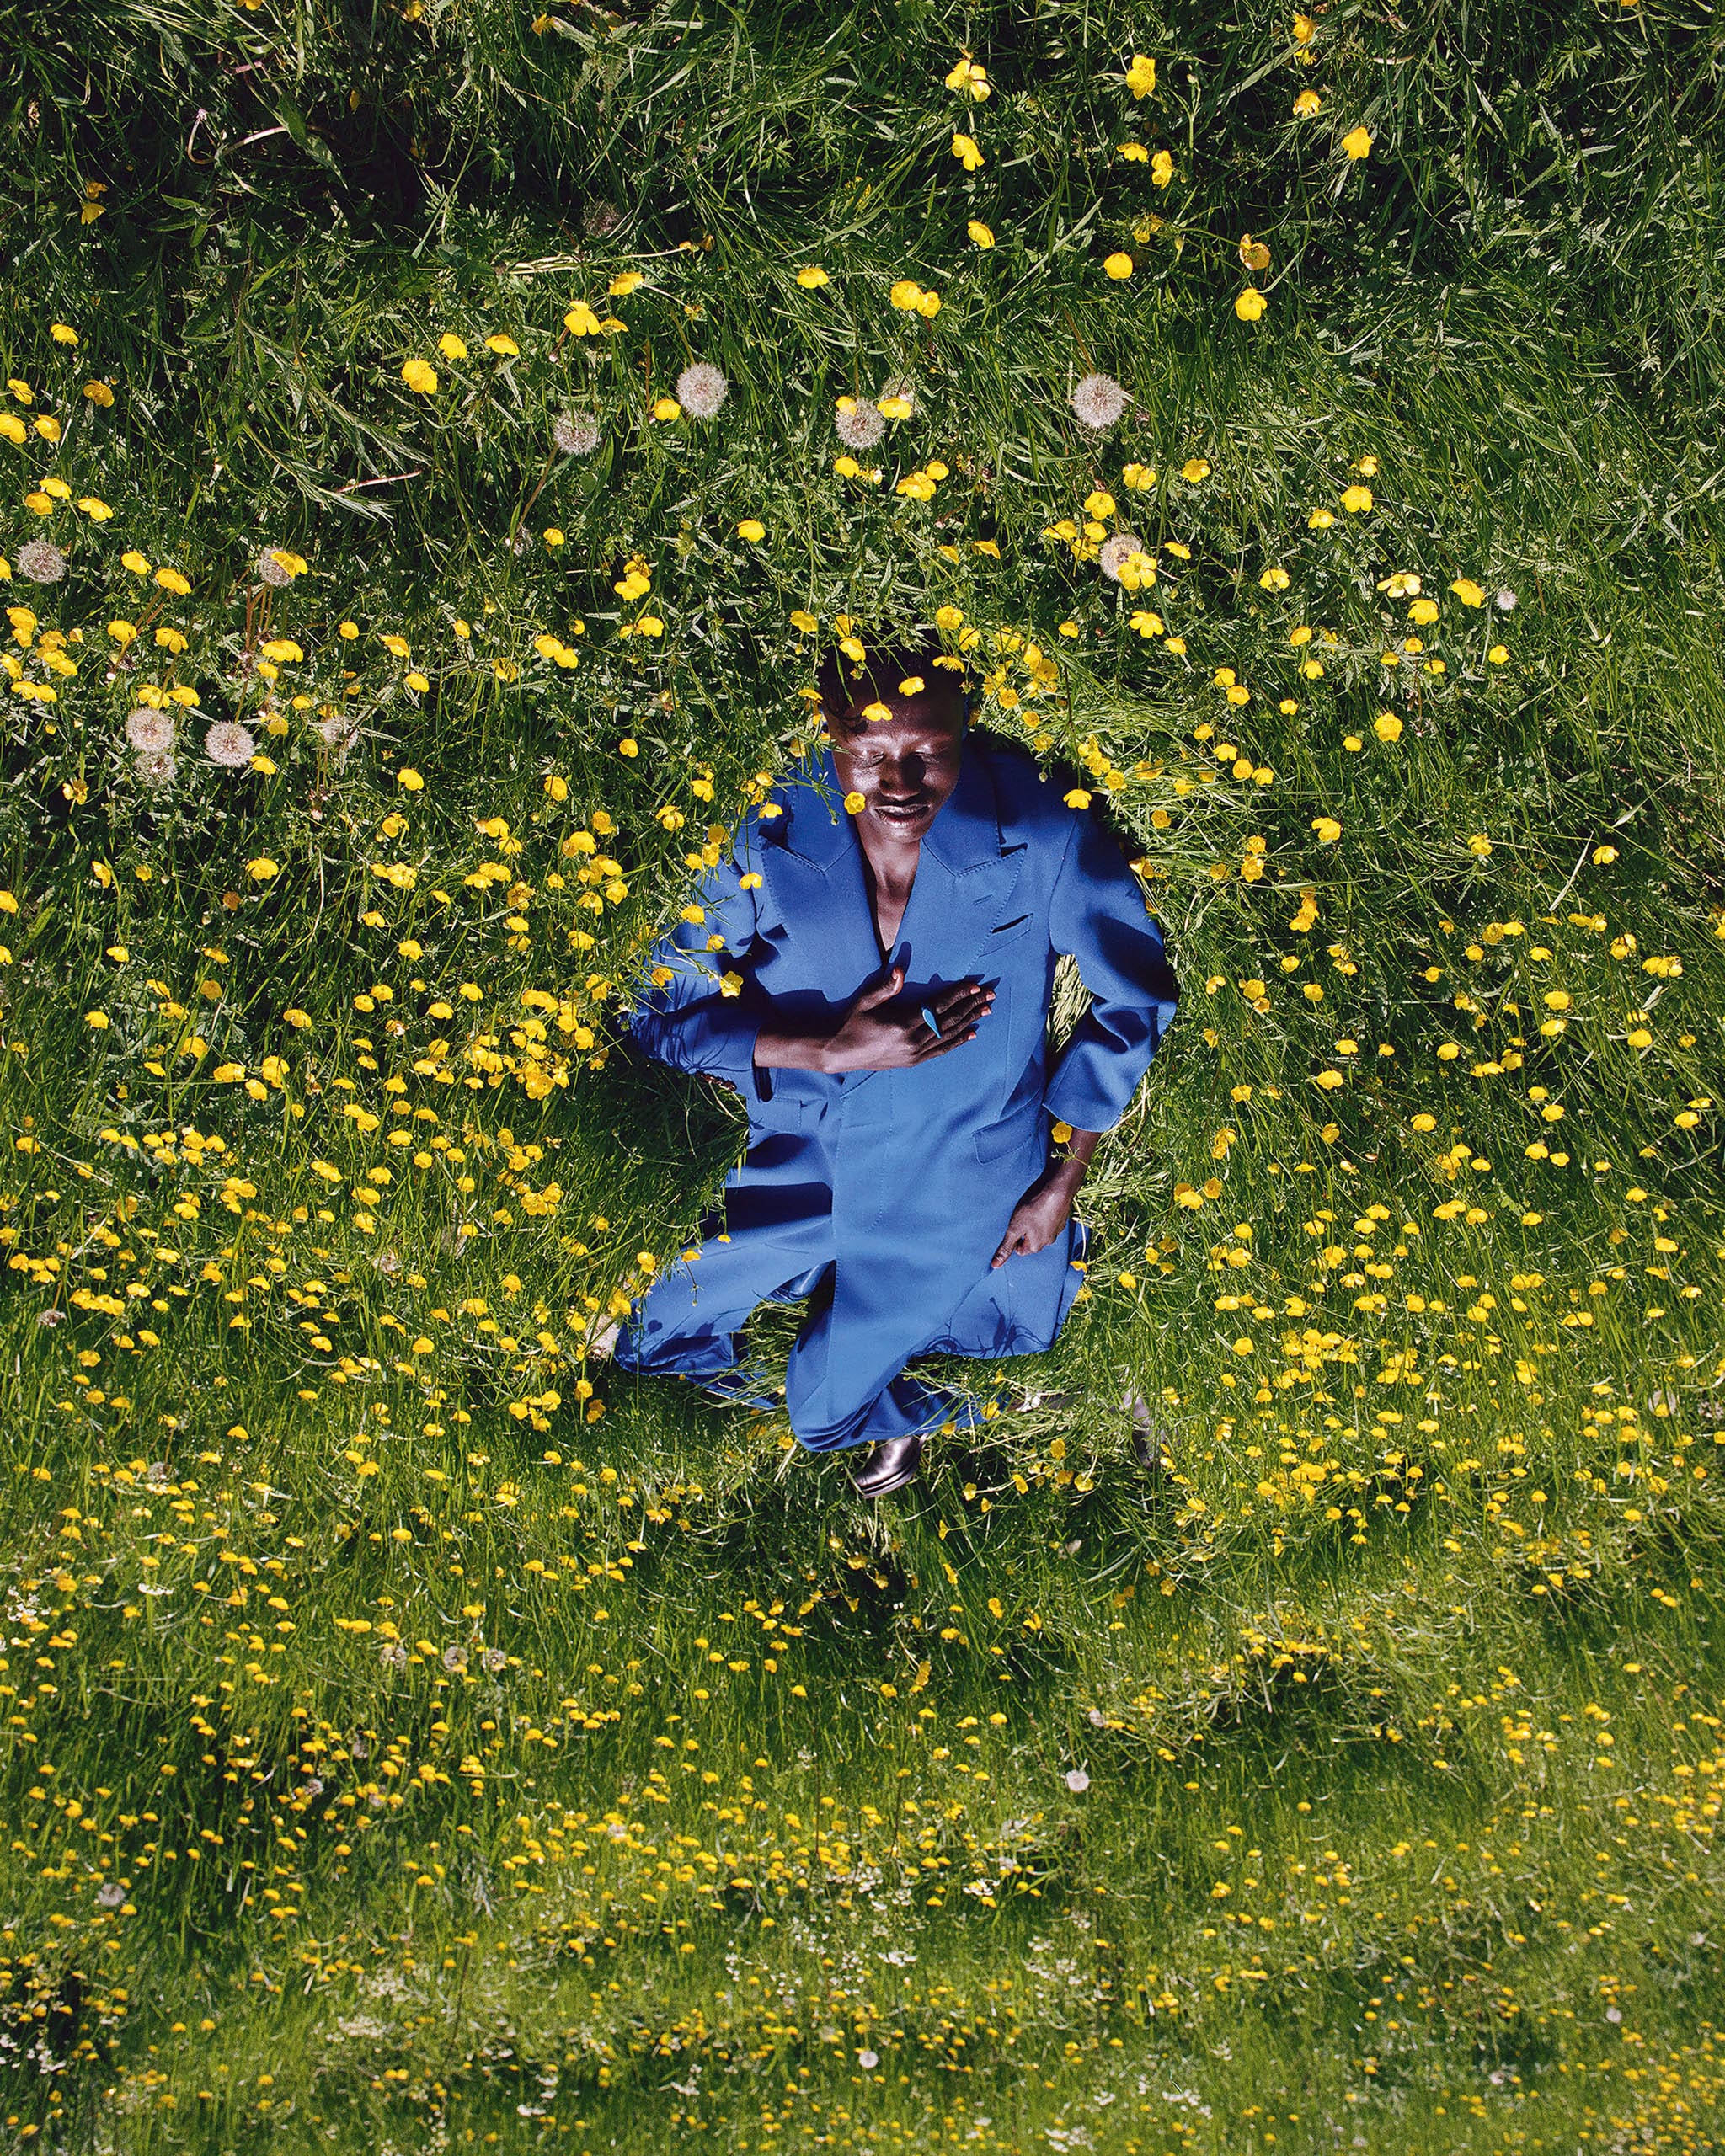 A model wearing a blue outfit on the green grass with yellow flowers